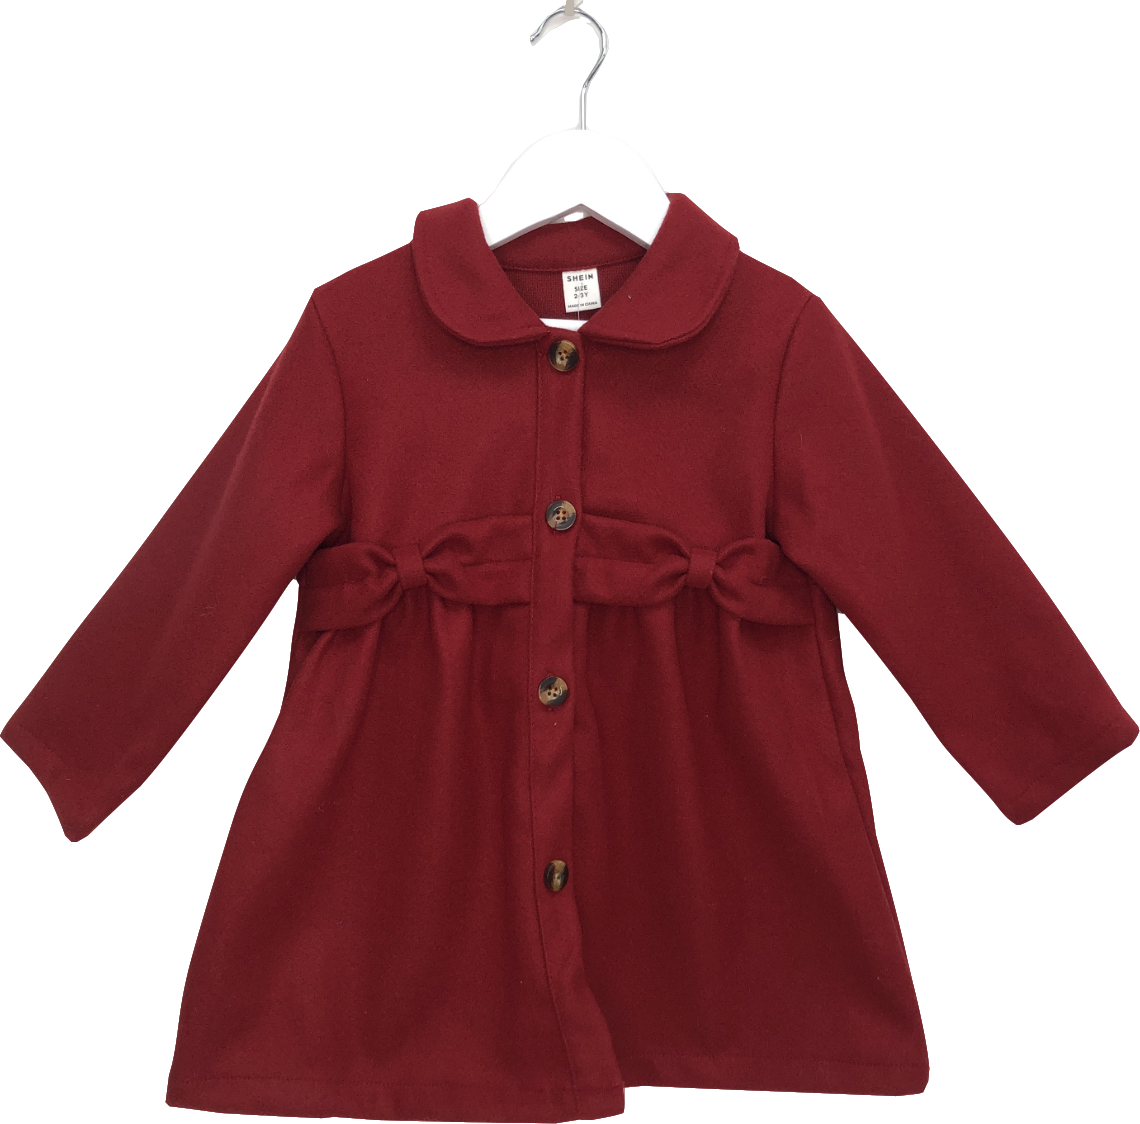 SHEIN Red Wool Look Coat With Bow Waistband 9-12 Months